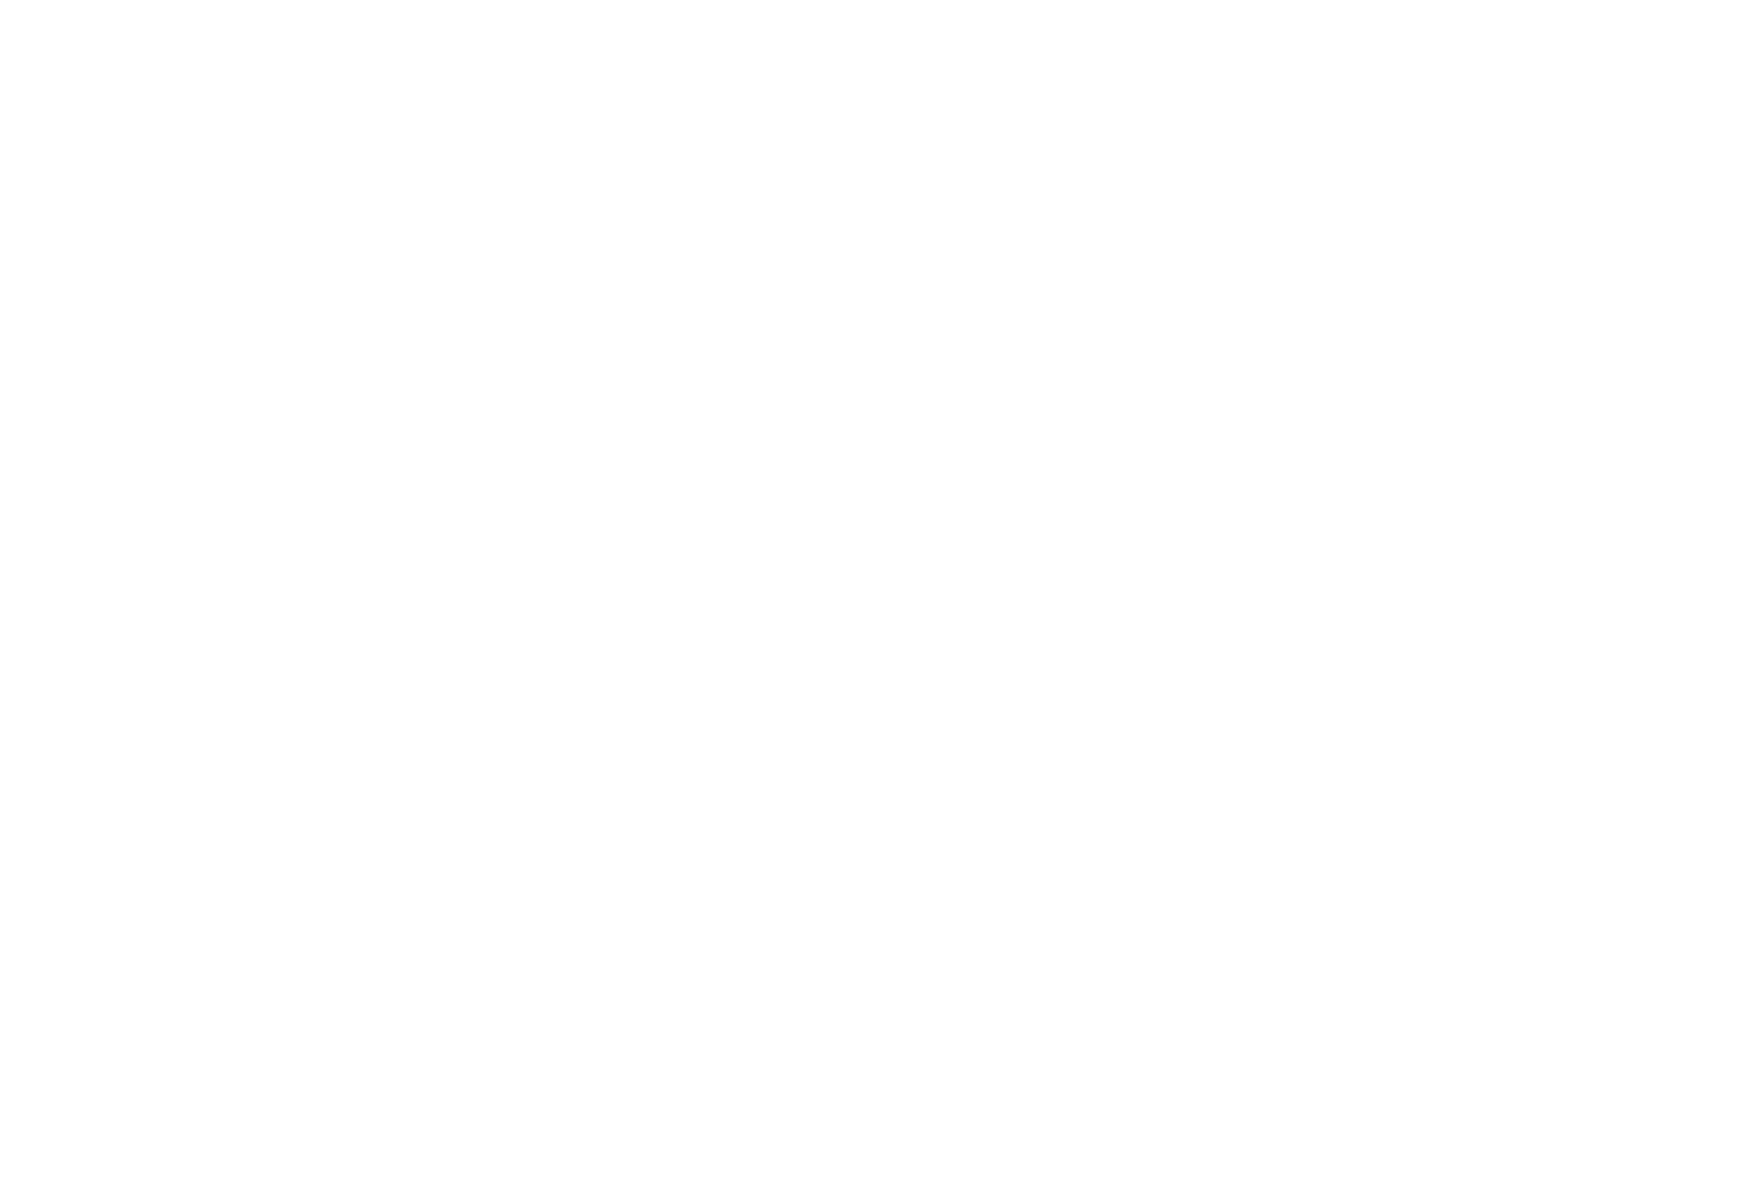 GTR East Africa 2024 Nairobi Trade and export financing event